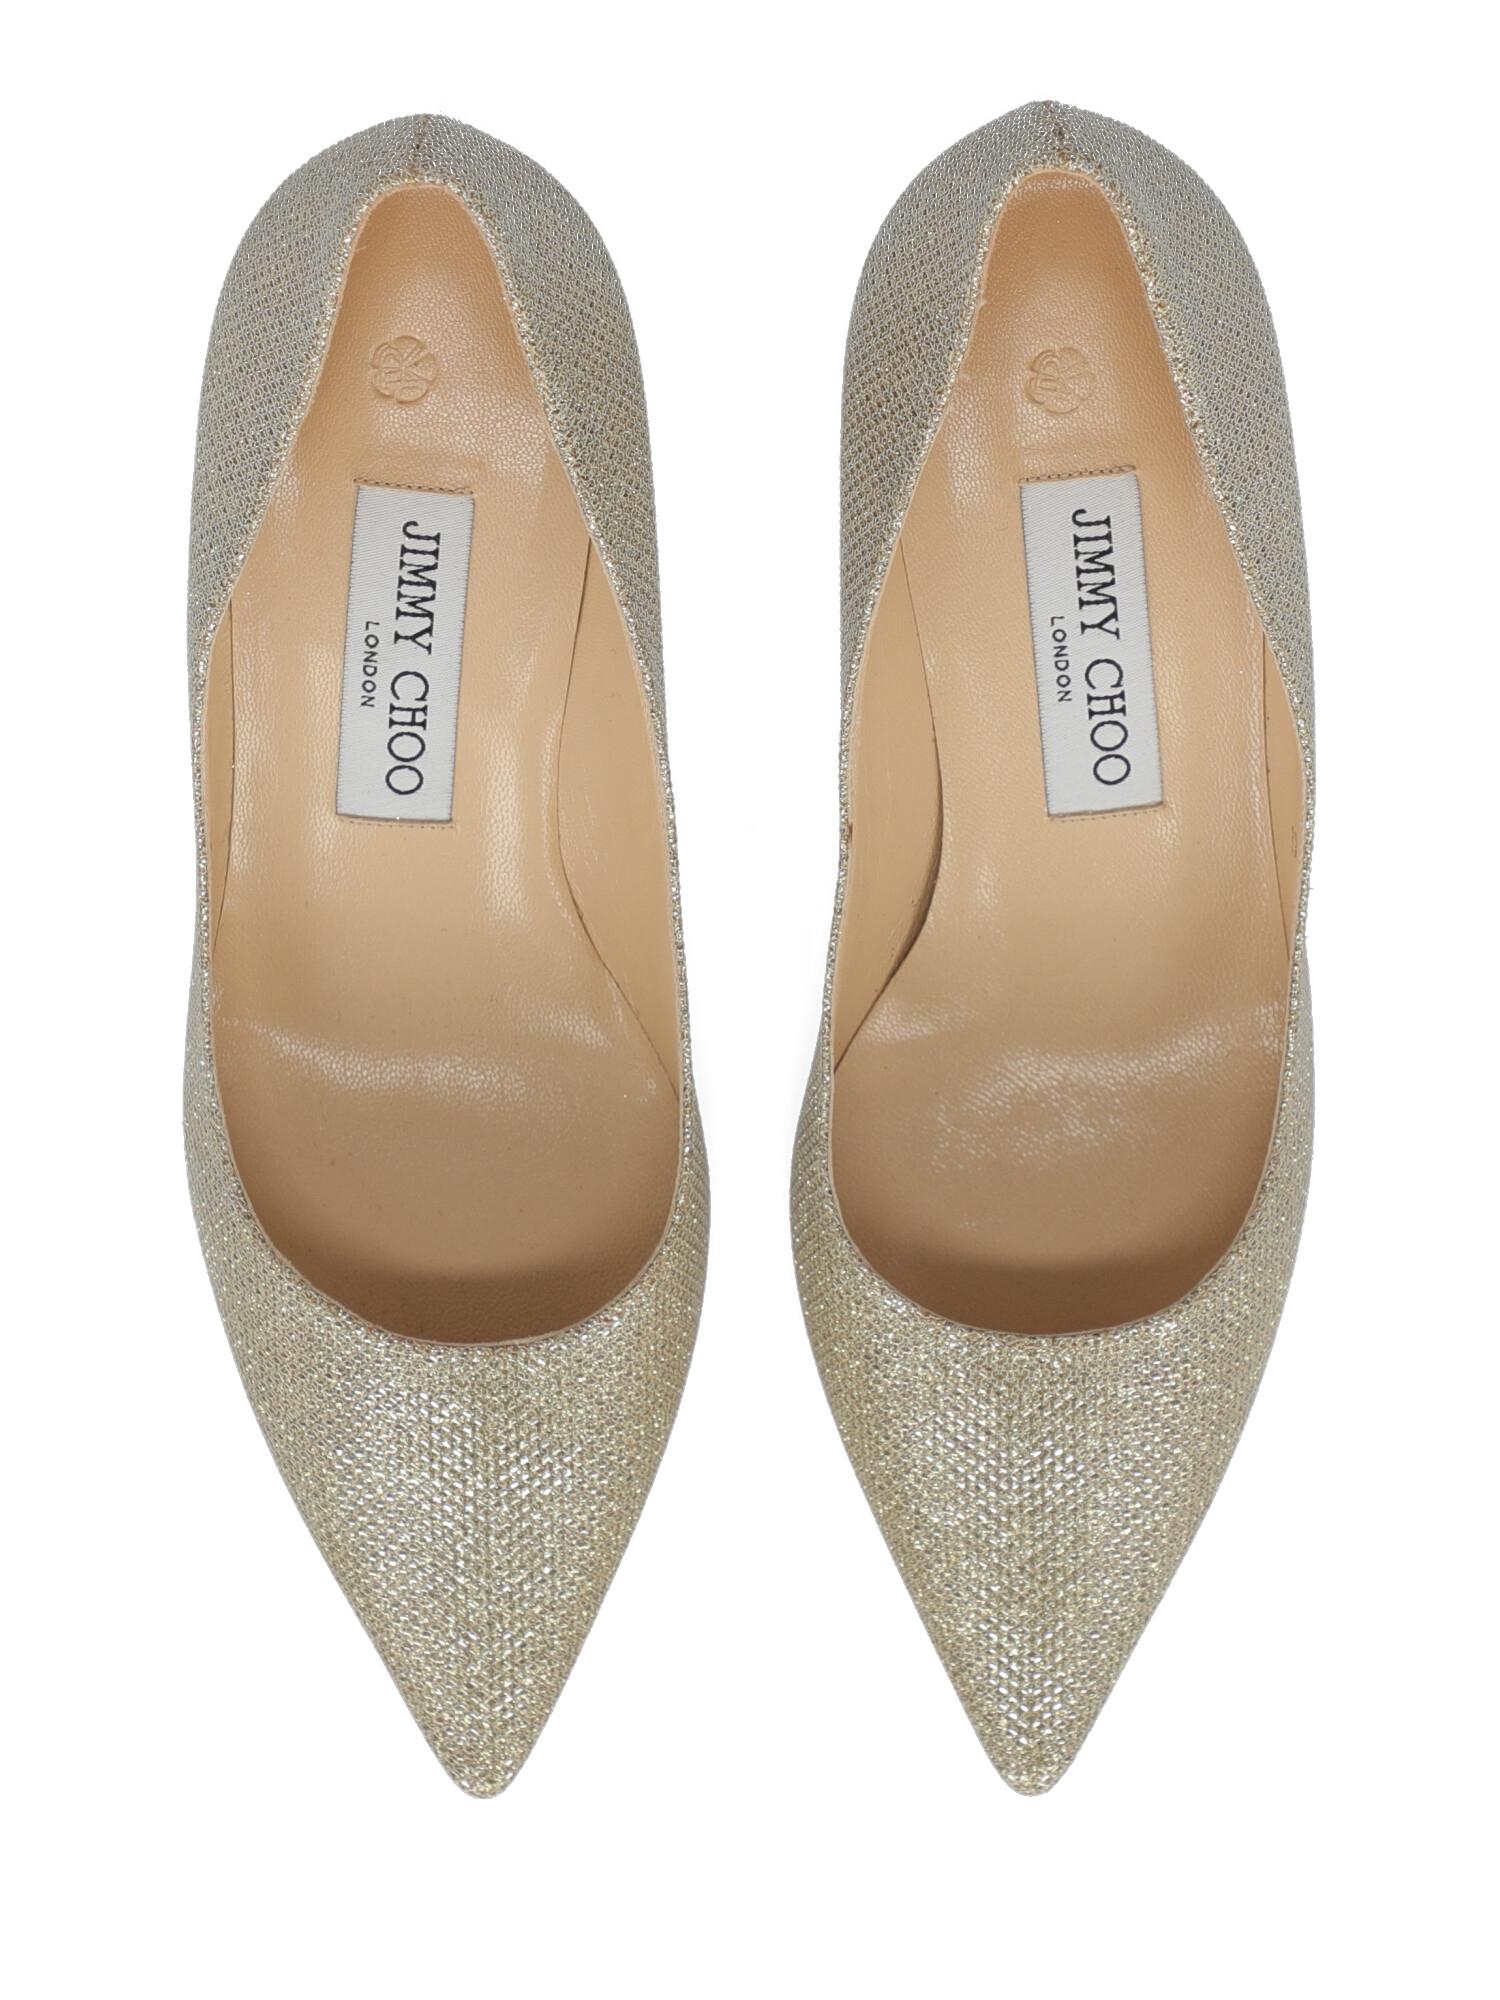 Jimmy Choo Woman Pumps Gold Fabric IT 37 For Sale 2